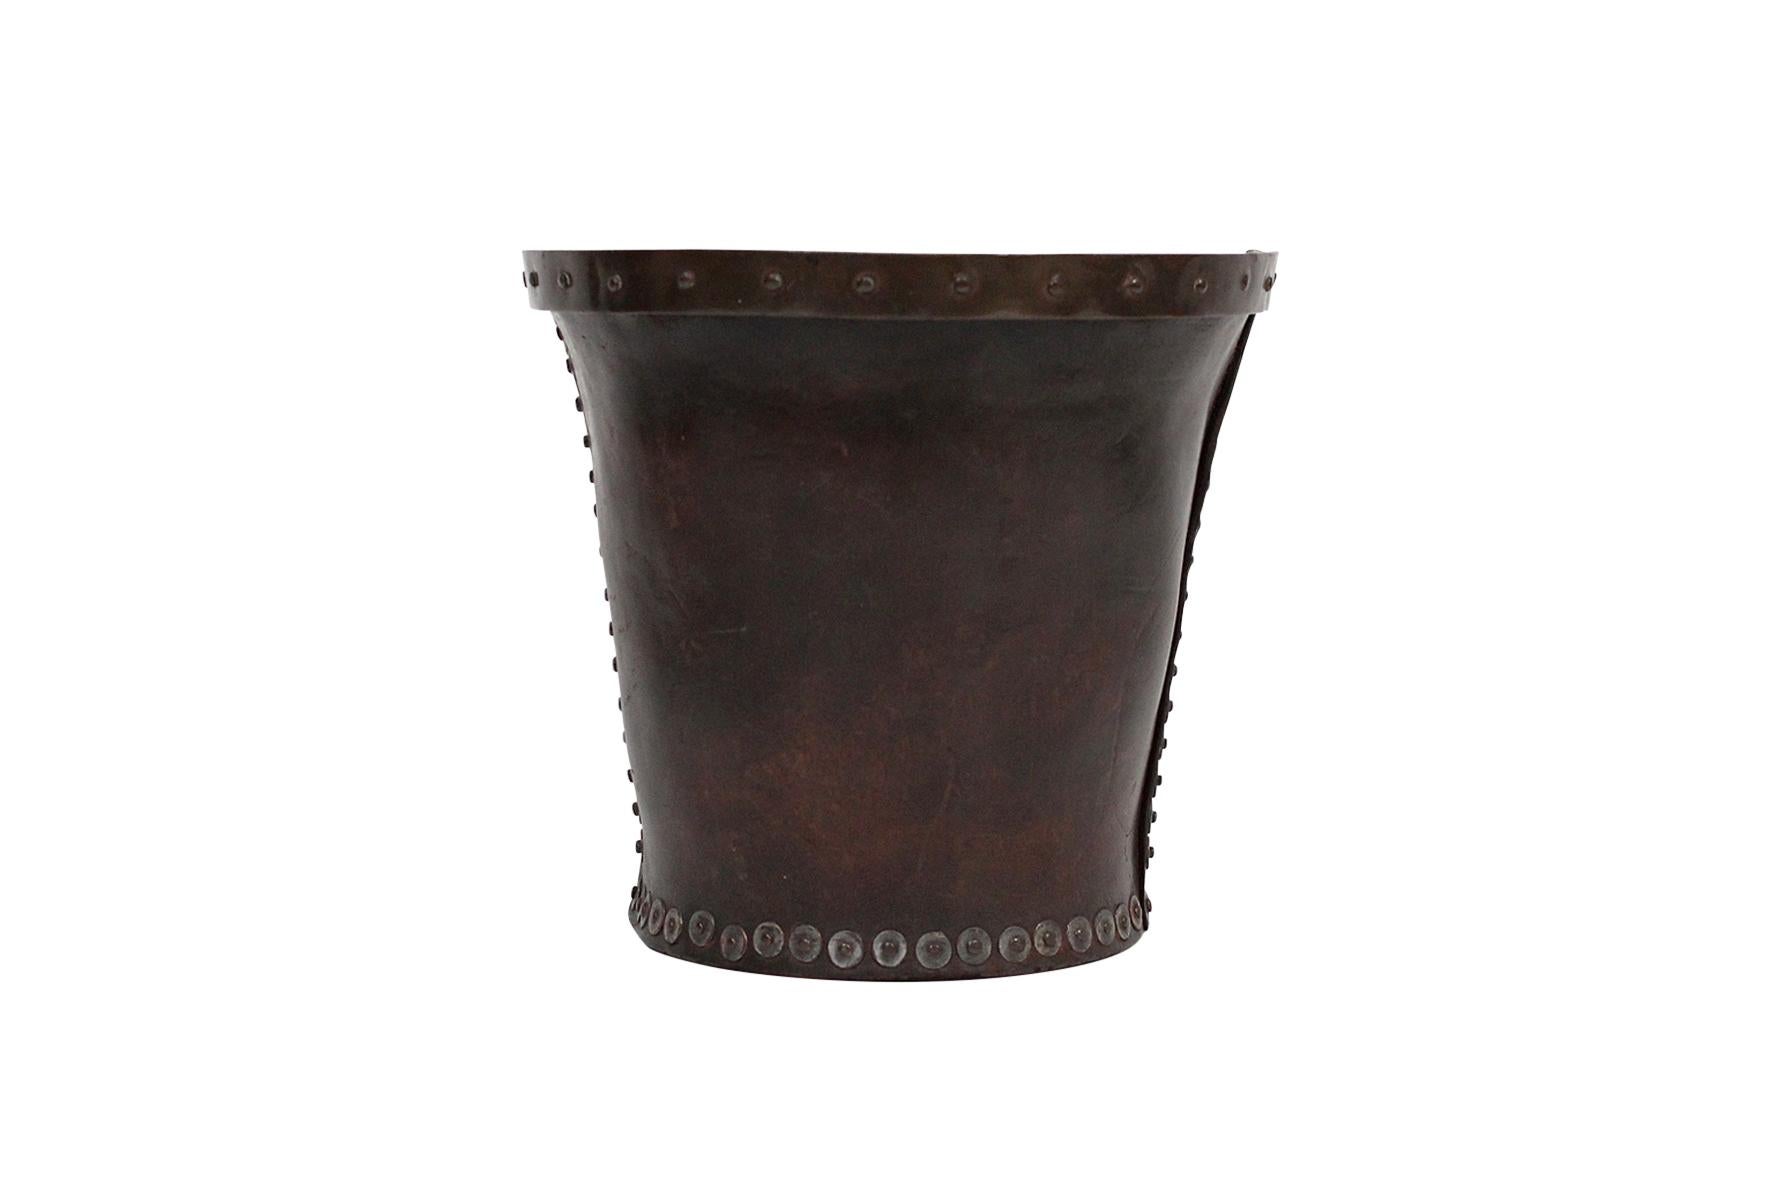 Late 19th early 20th century leather wastebasket with copper trim and steel rivets.